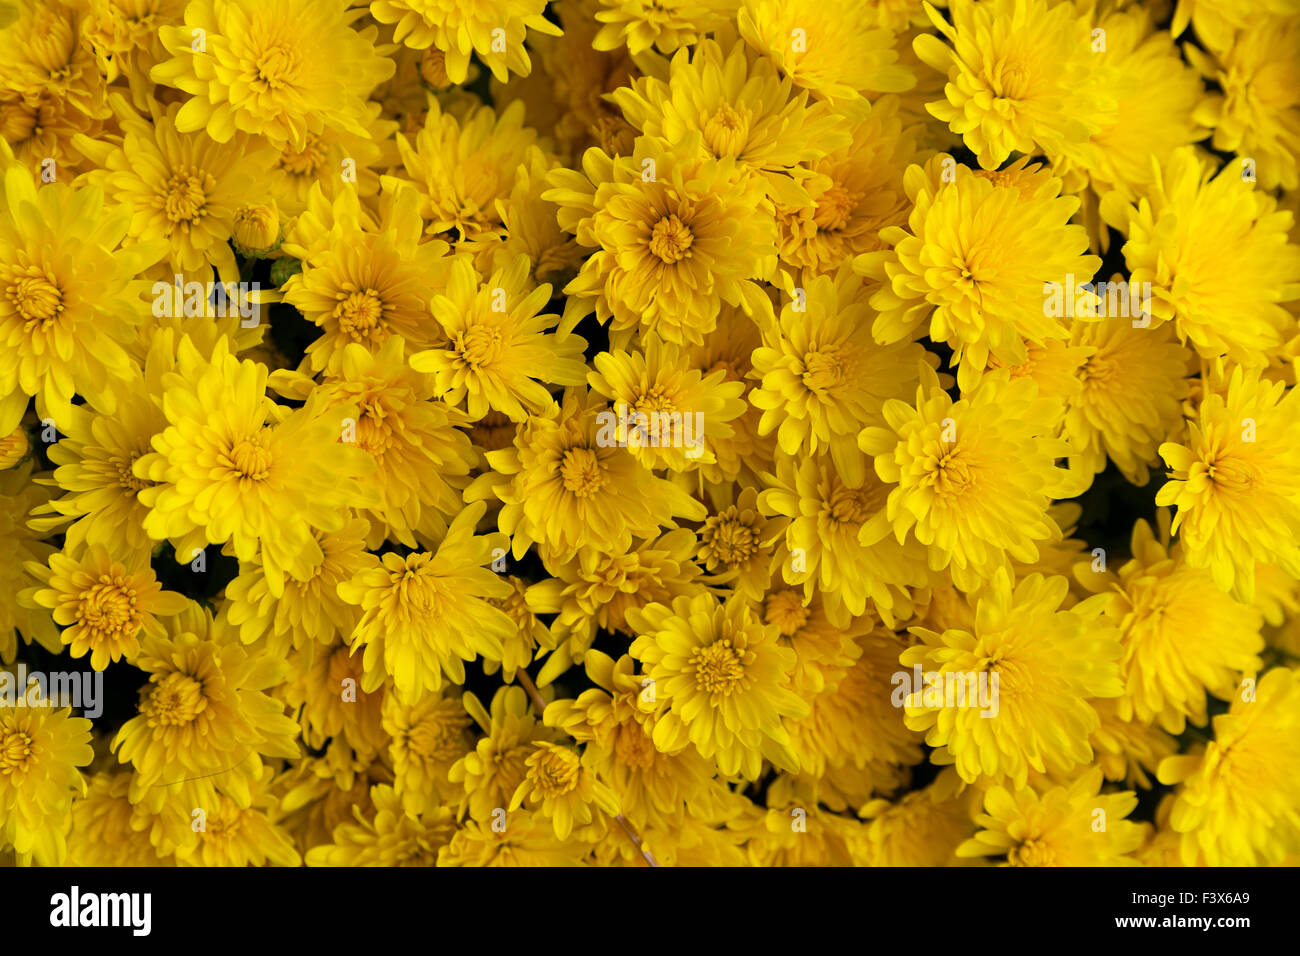 A close view of yellow mums flowers. Stock Photo